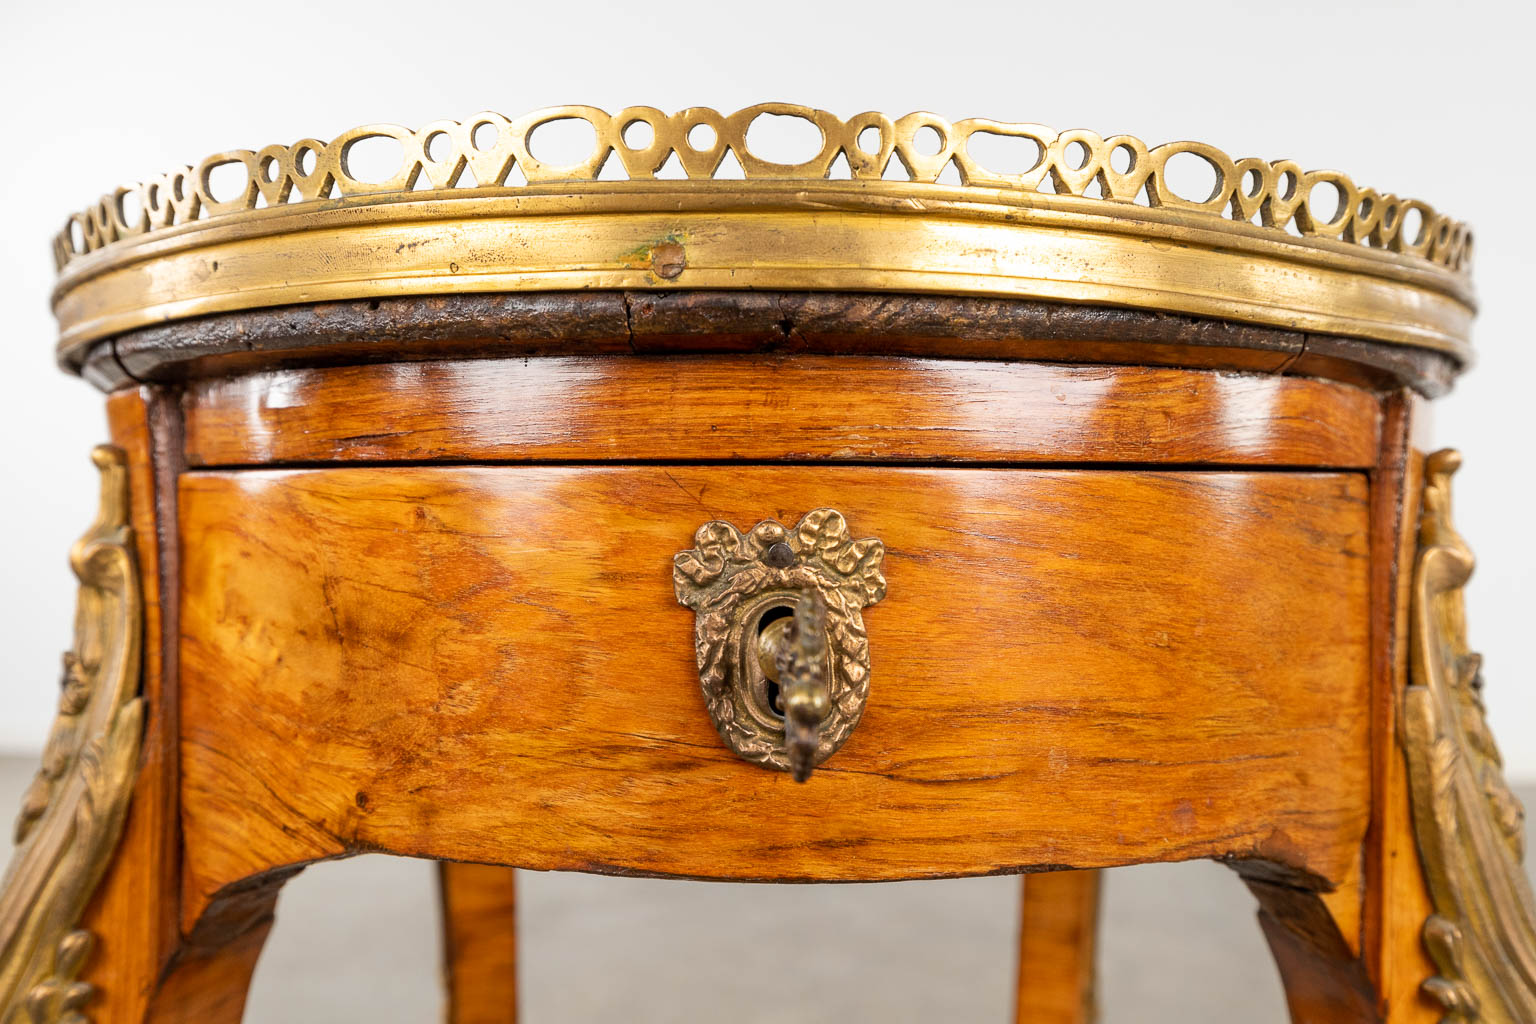 An antique side table, Louis XV, marquetry mounted with bronze and marble, 18th C. (D:38 x W:50 x H:73 cm)